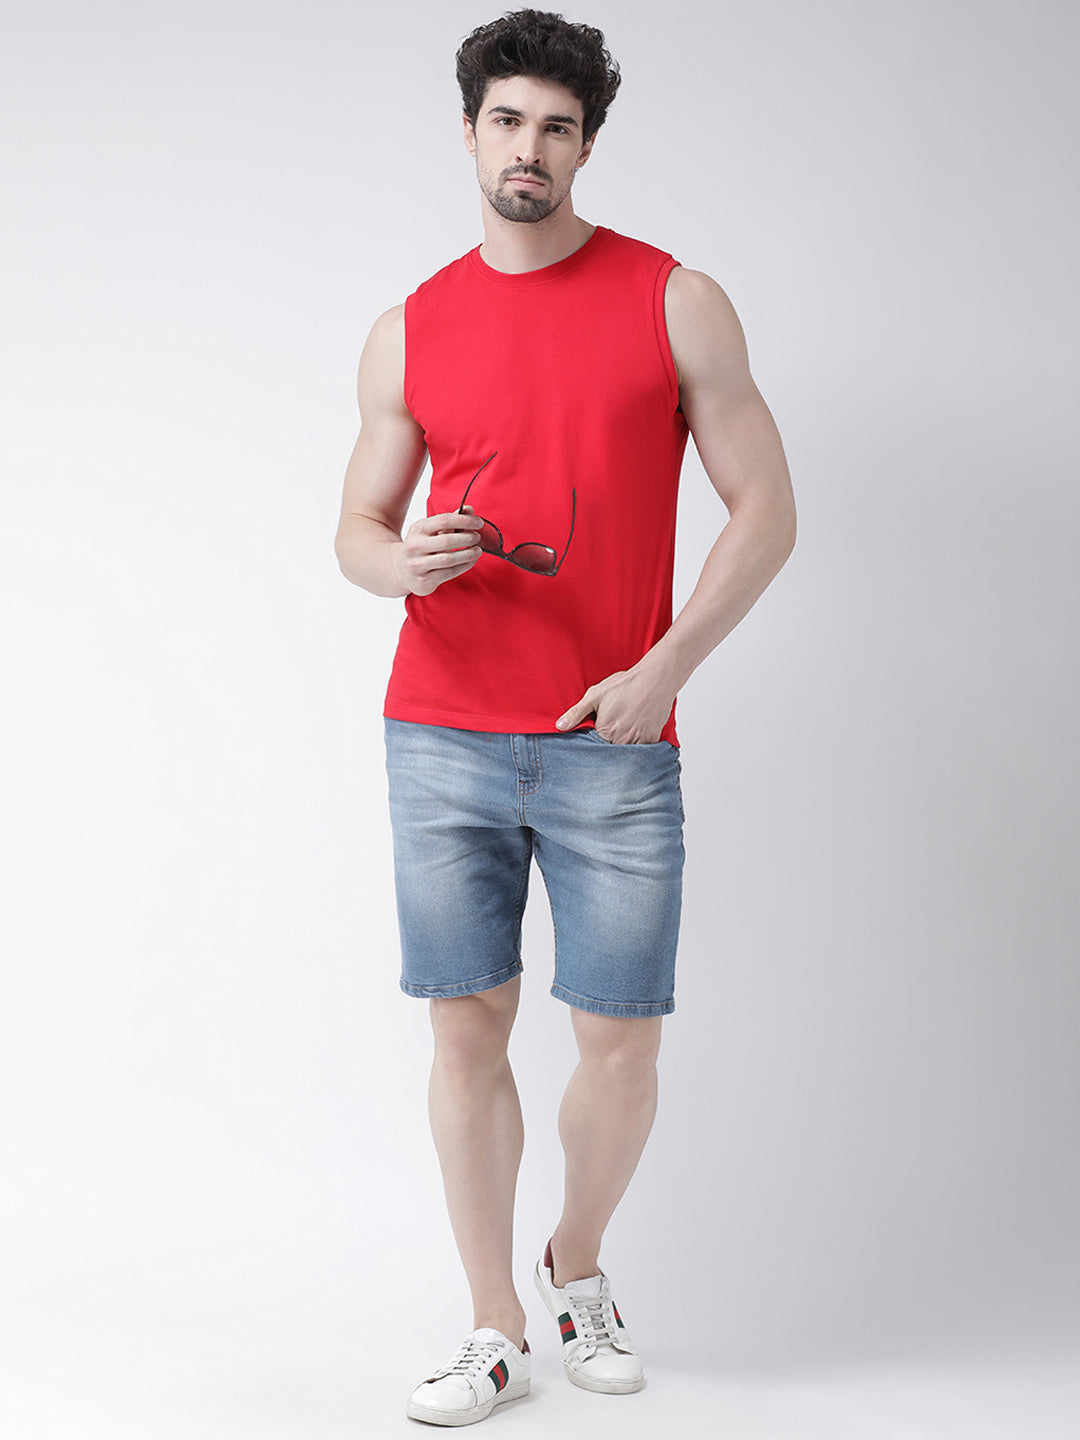 Friskers Solid Men Round Neck Sleeveless T-Shirt - Friskers